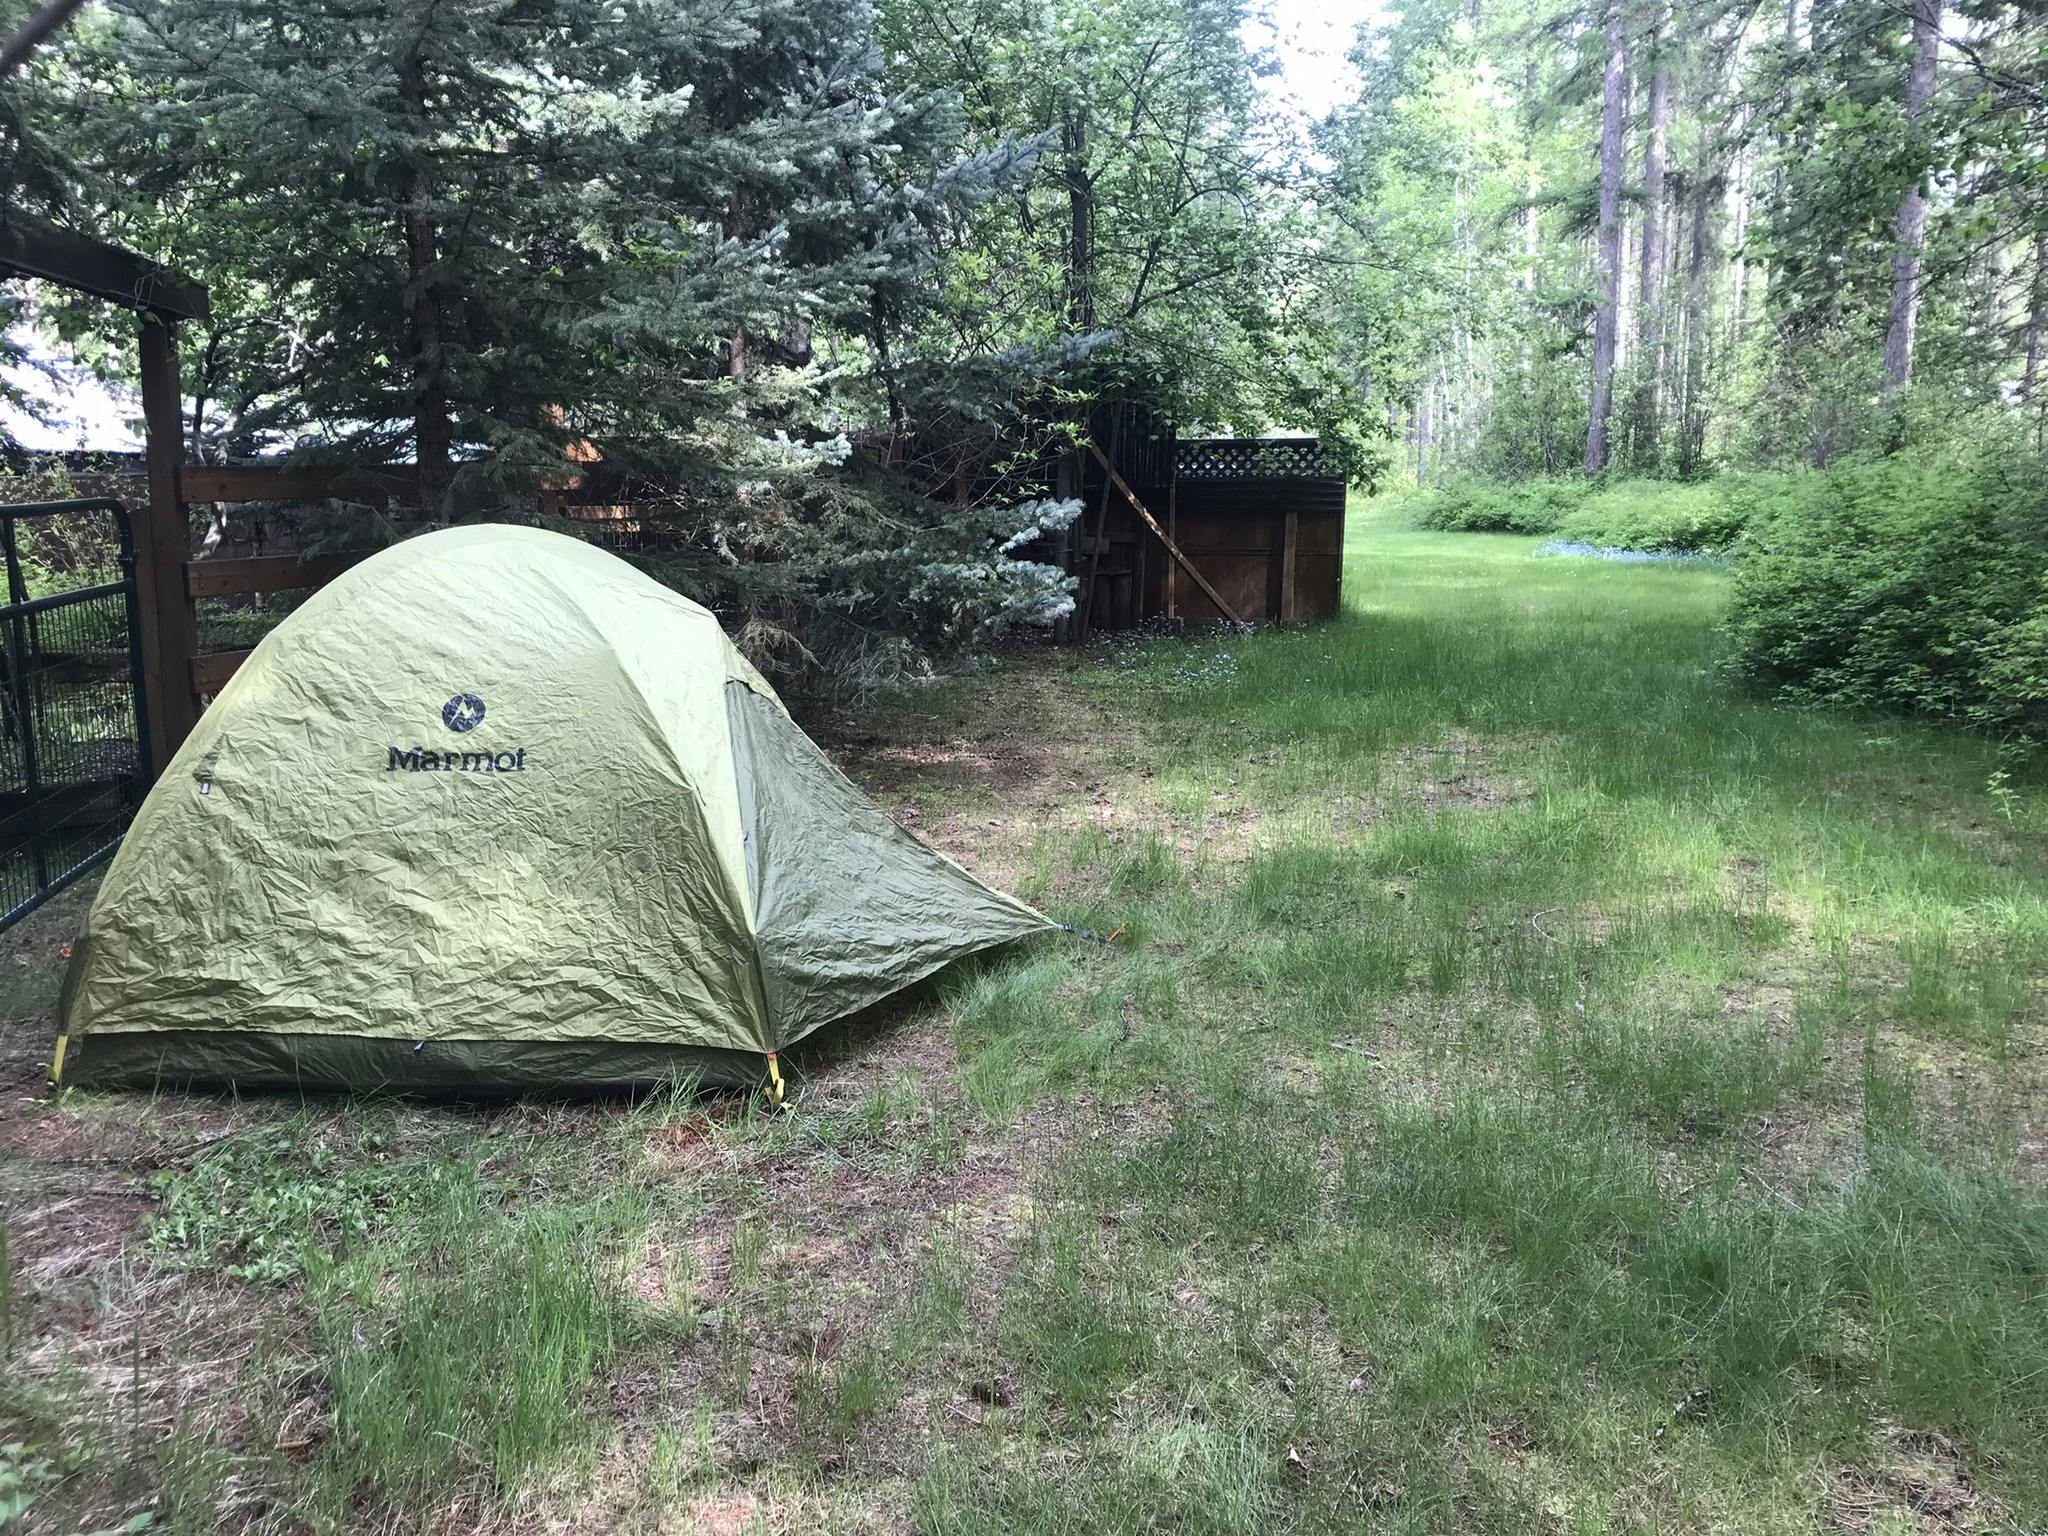 The Marmot Tungsten 3P tent set up in some grass.